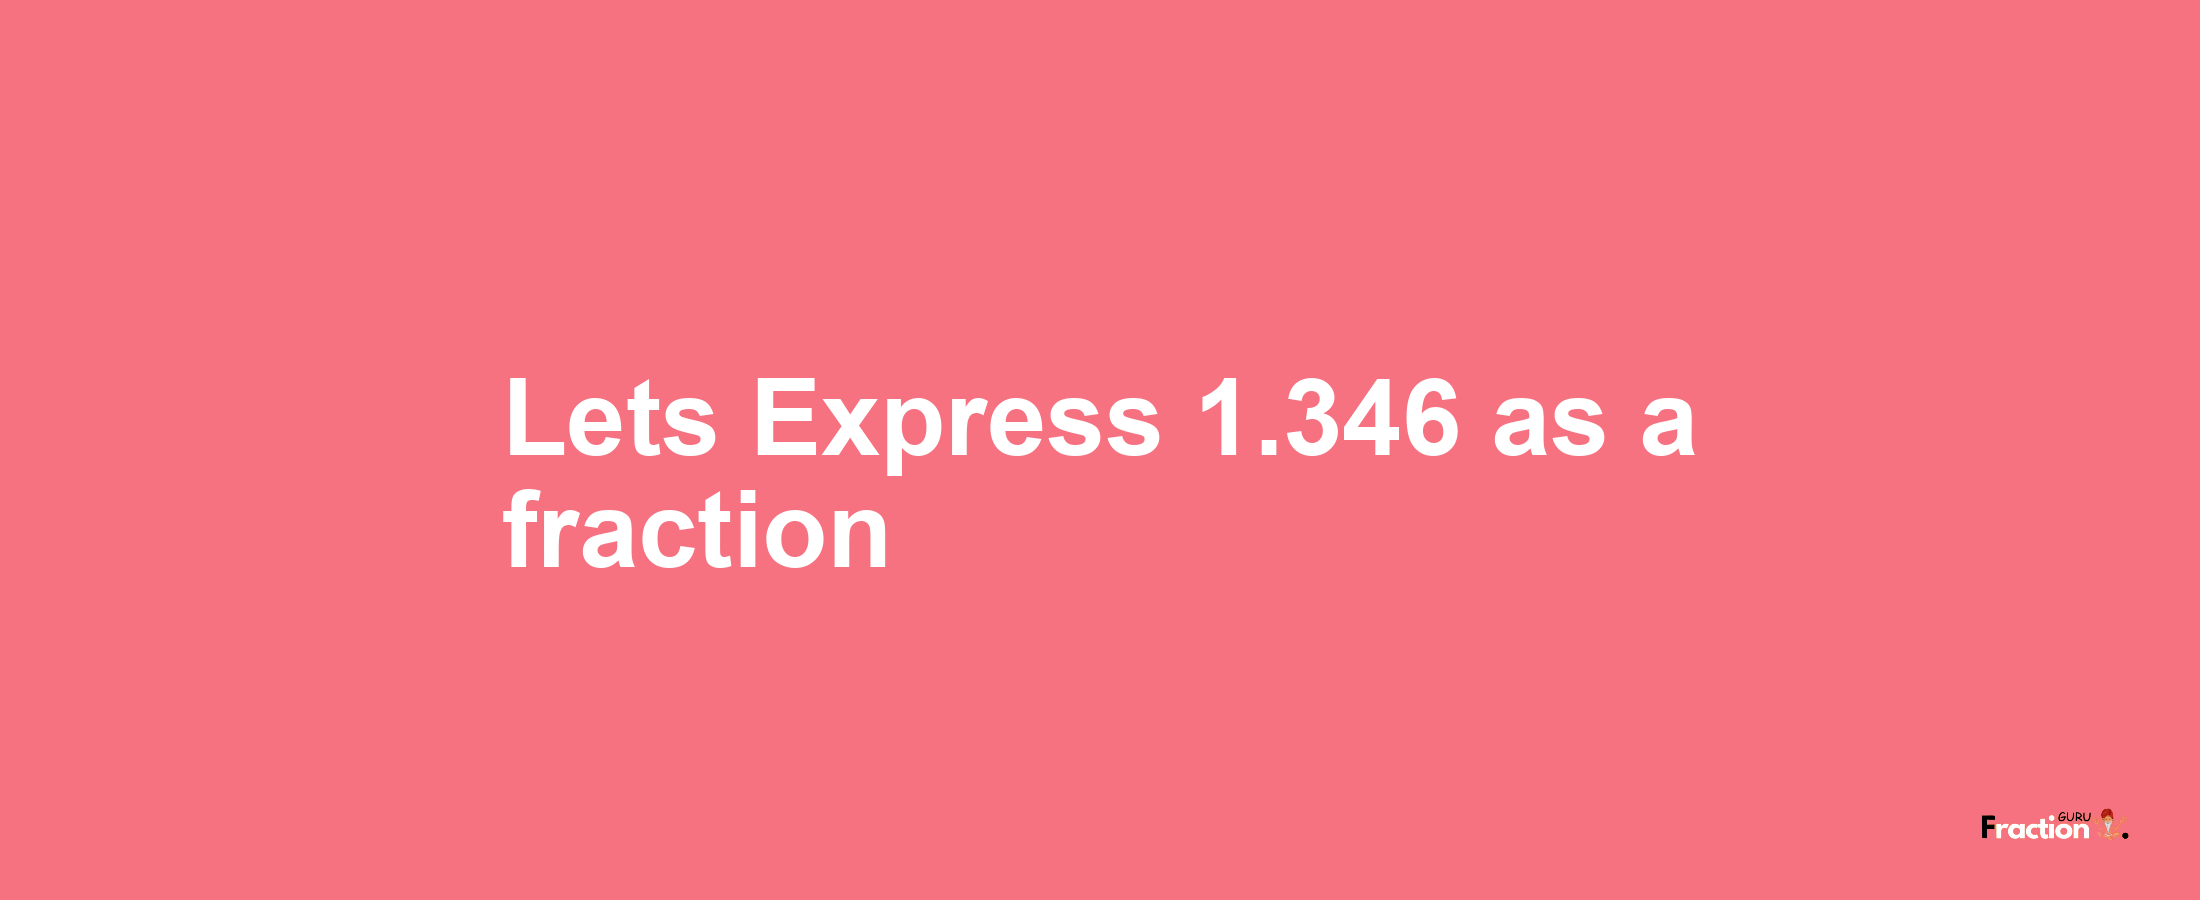 Lets Express 1.346 as afraction